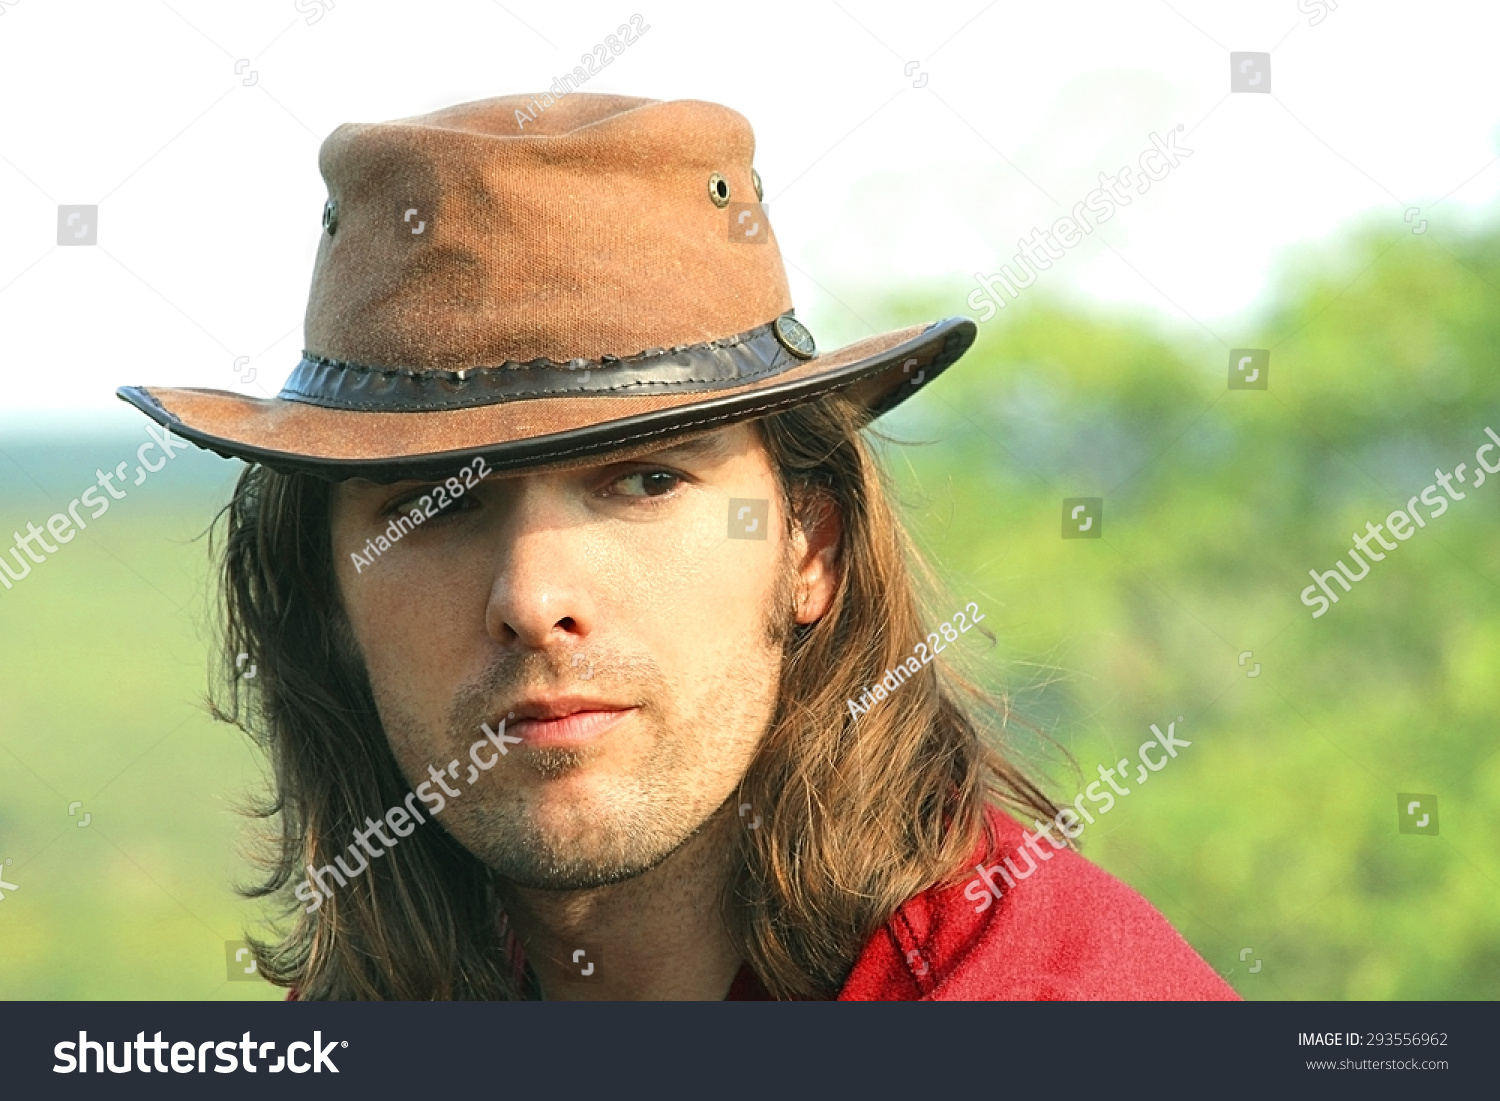 Close-Up Portrait Of Guy With Long Hair In Cowboy Hat. Style Safari